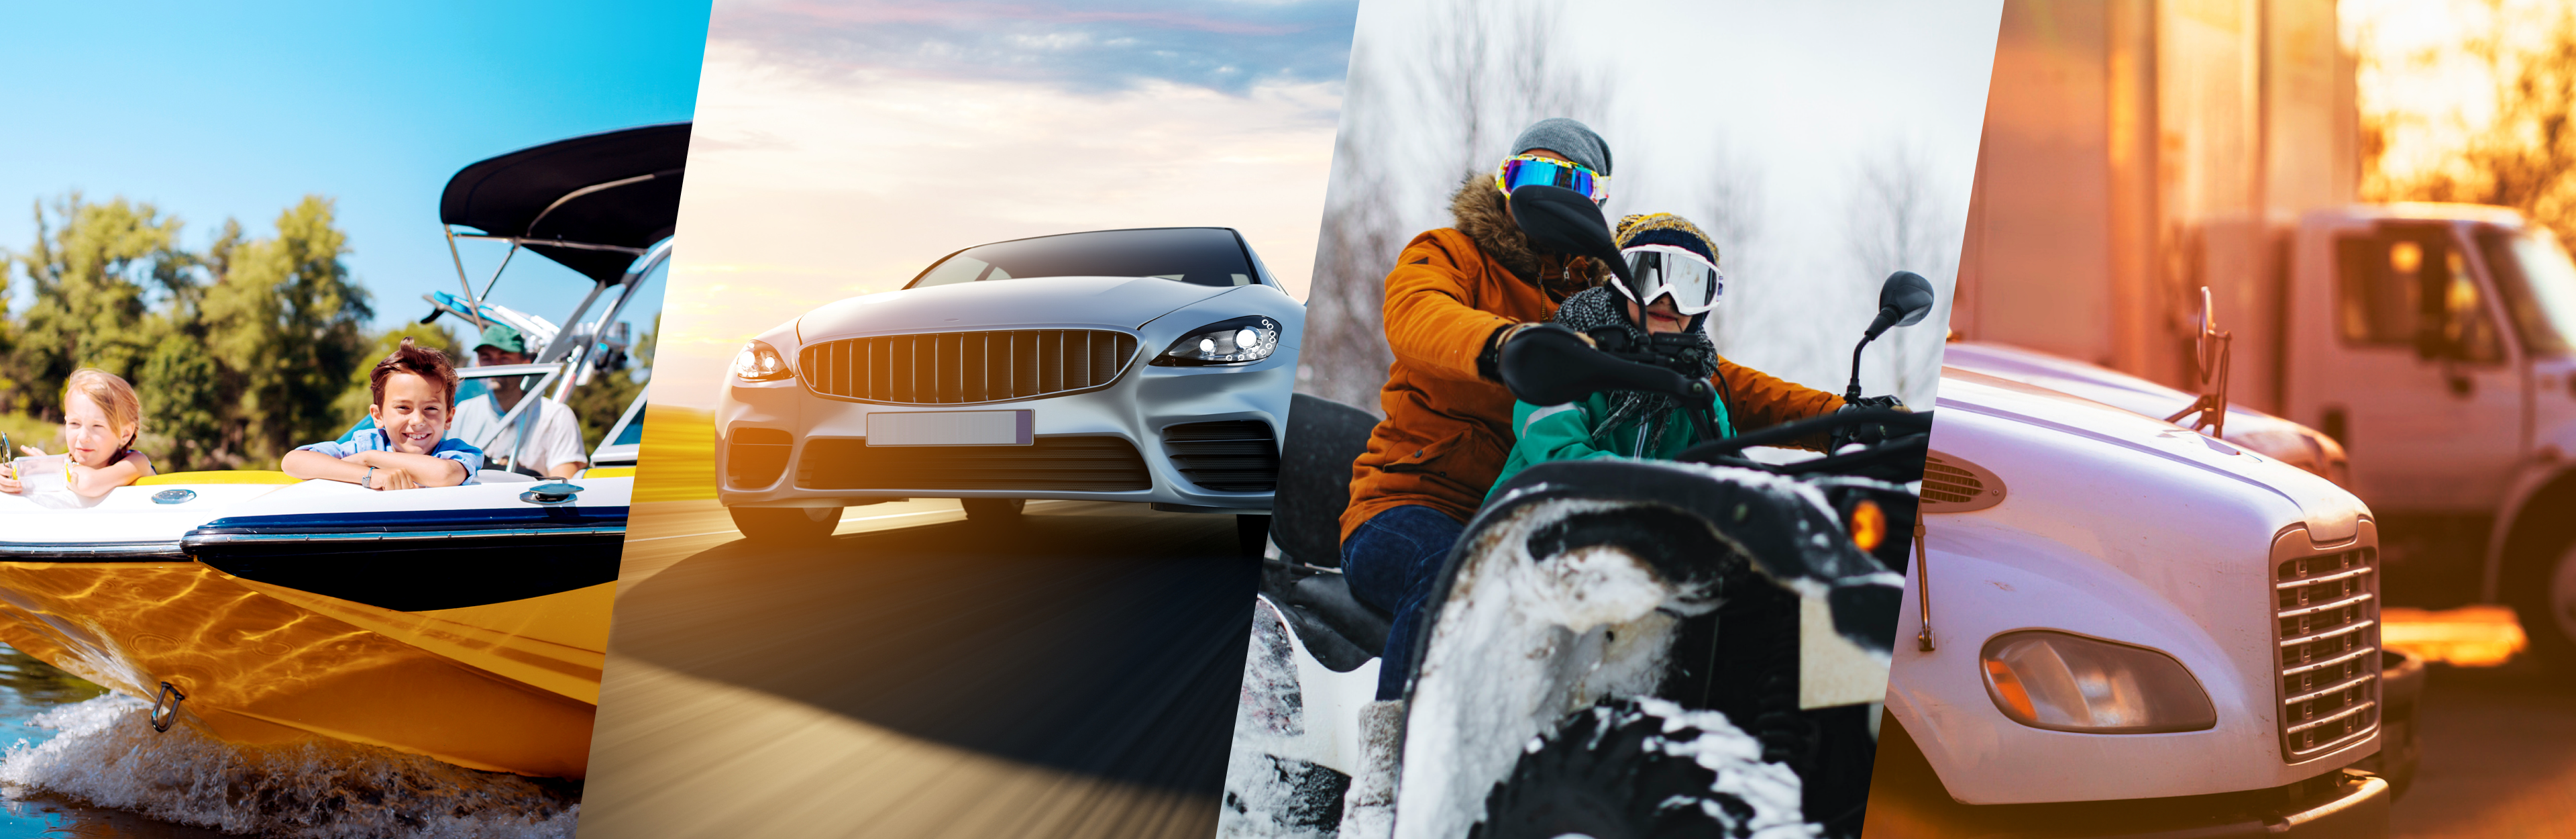 Background image divided into four segments, segment one shows a caucasian boy, girl and man in a boat, second segment shows a luxury vehicle, third image shows two people on snow bikes, fourth segment shows transport trucks